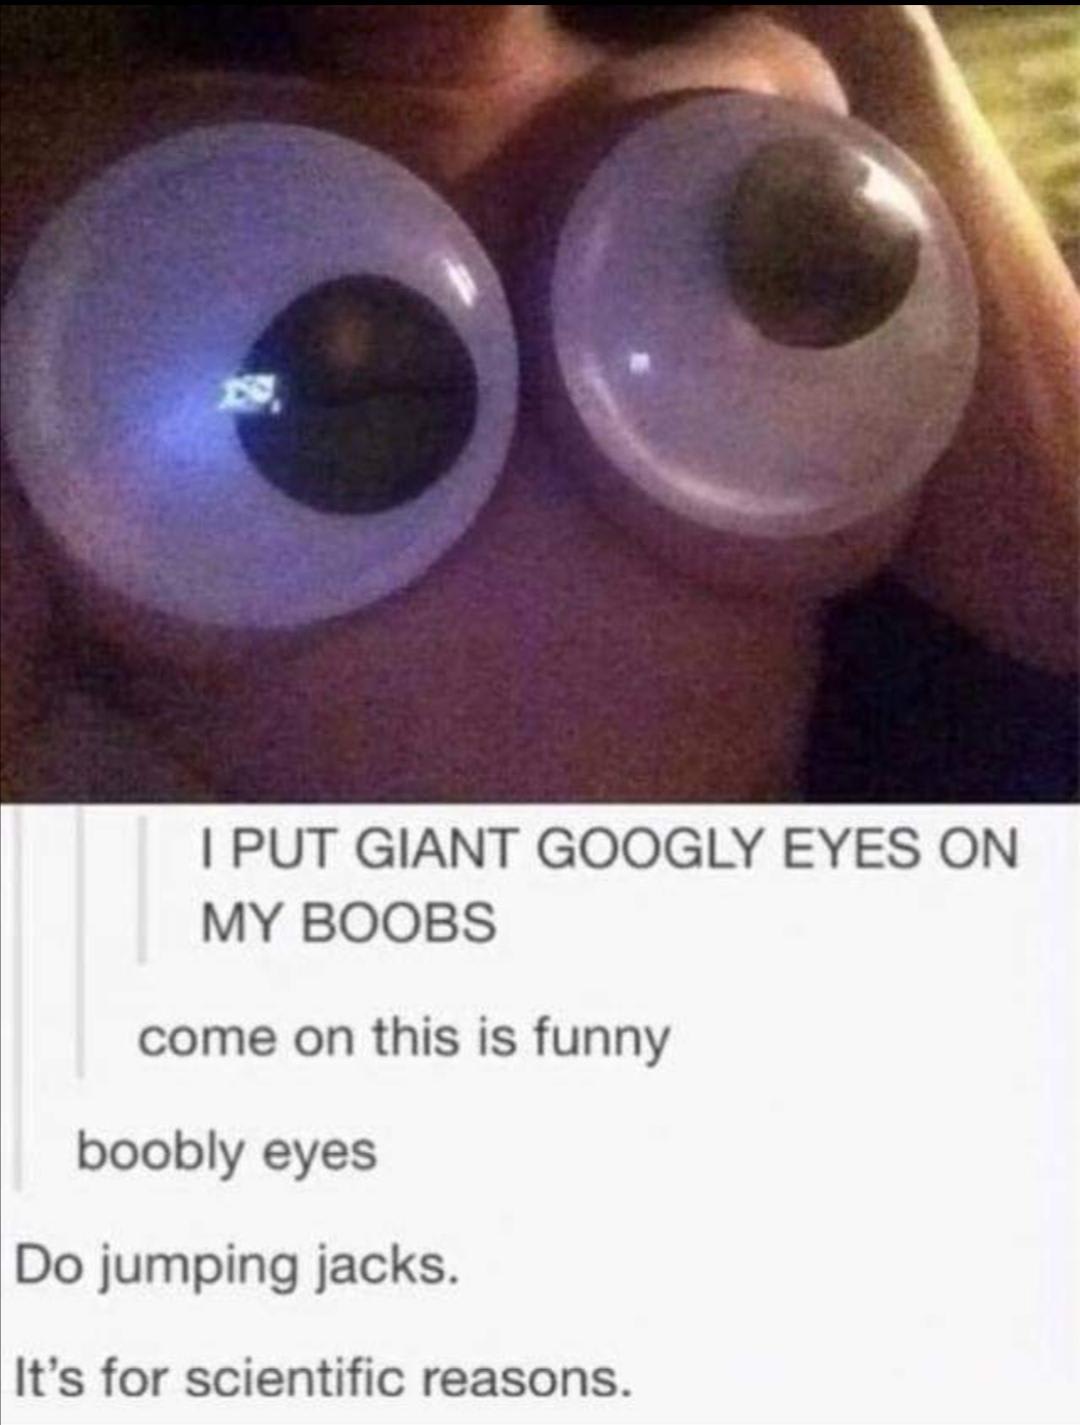 1) saw this. 2) laughed so hard I choked on my tea (typical Englishwoman). 3) thought you ladies would enjoy this. 4) imagining jumping jacks + these. 5) considering buying giant googly eyes for totally legitimate scientific reasons.....🤫